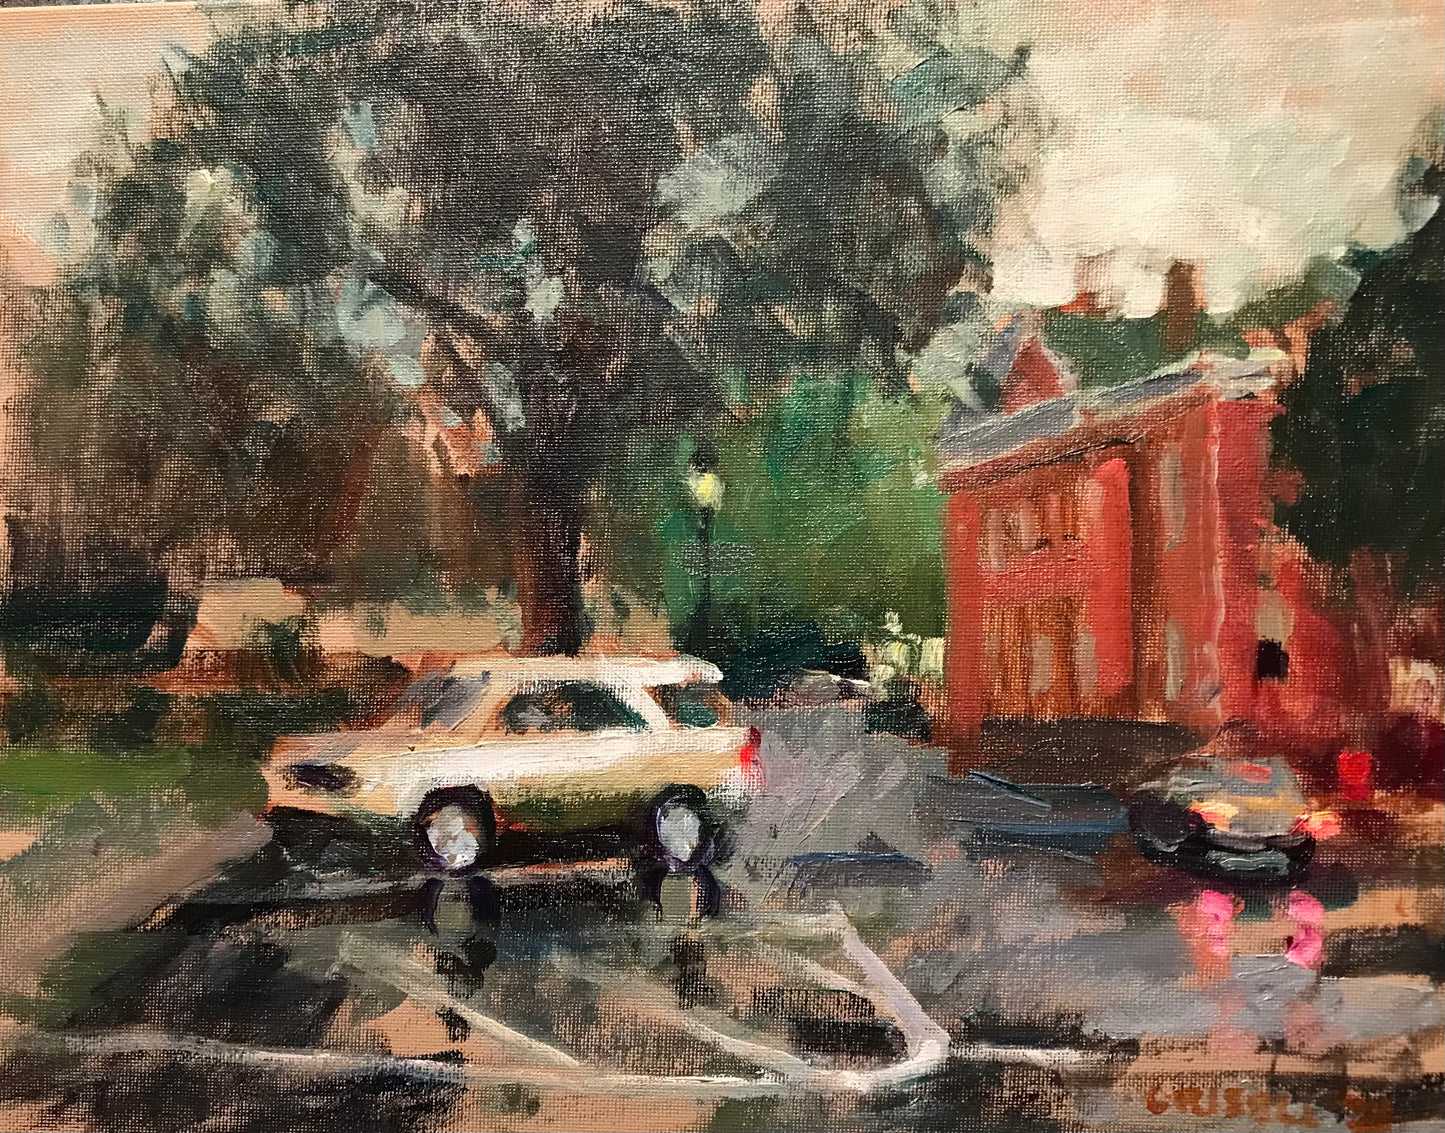 Rainy Day, New Milford (11 x 14 Inches)